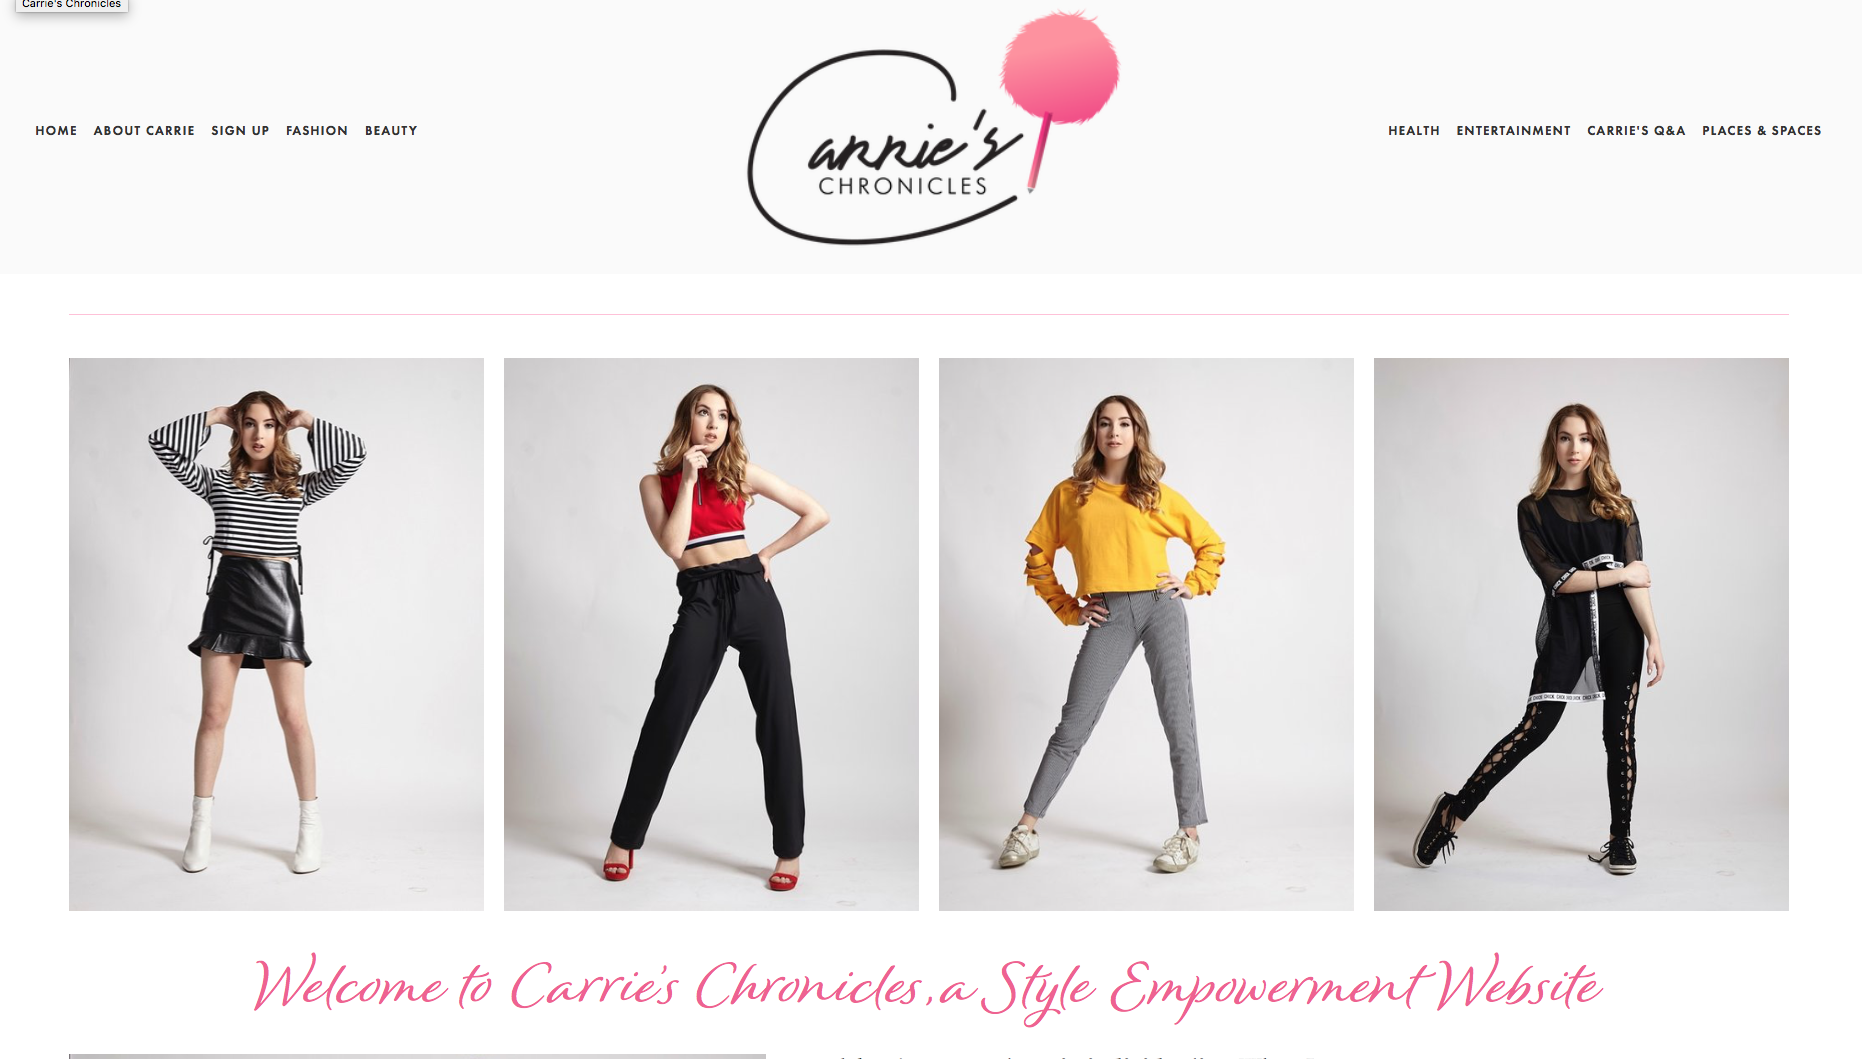 Carrie’s Chronicles: A Style Empowerment Site image